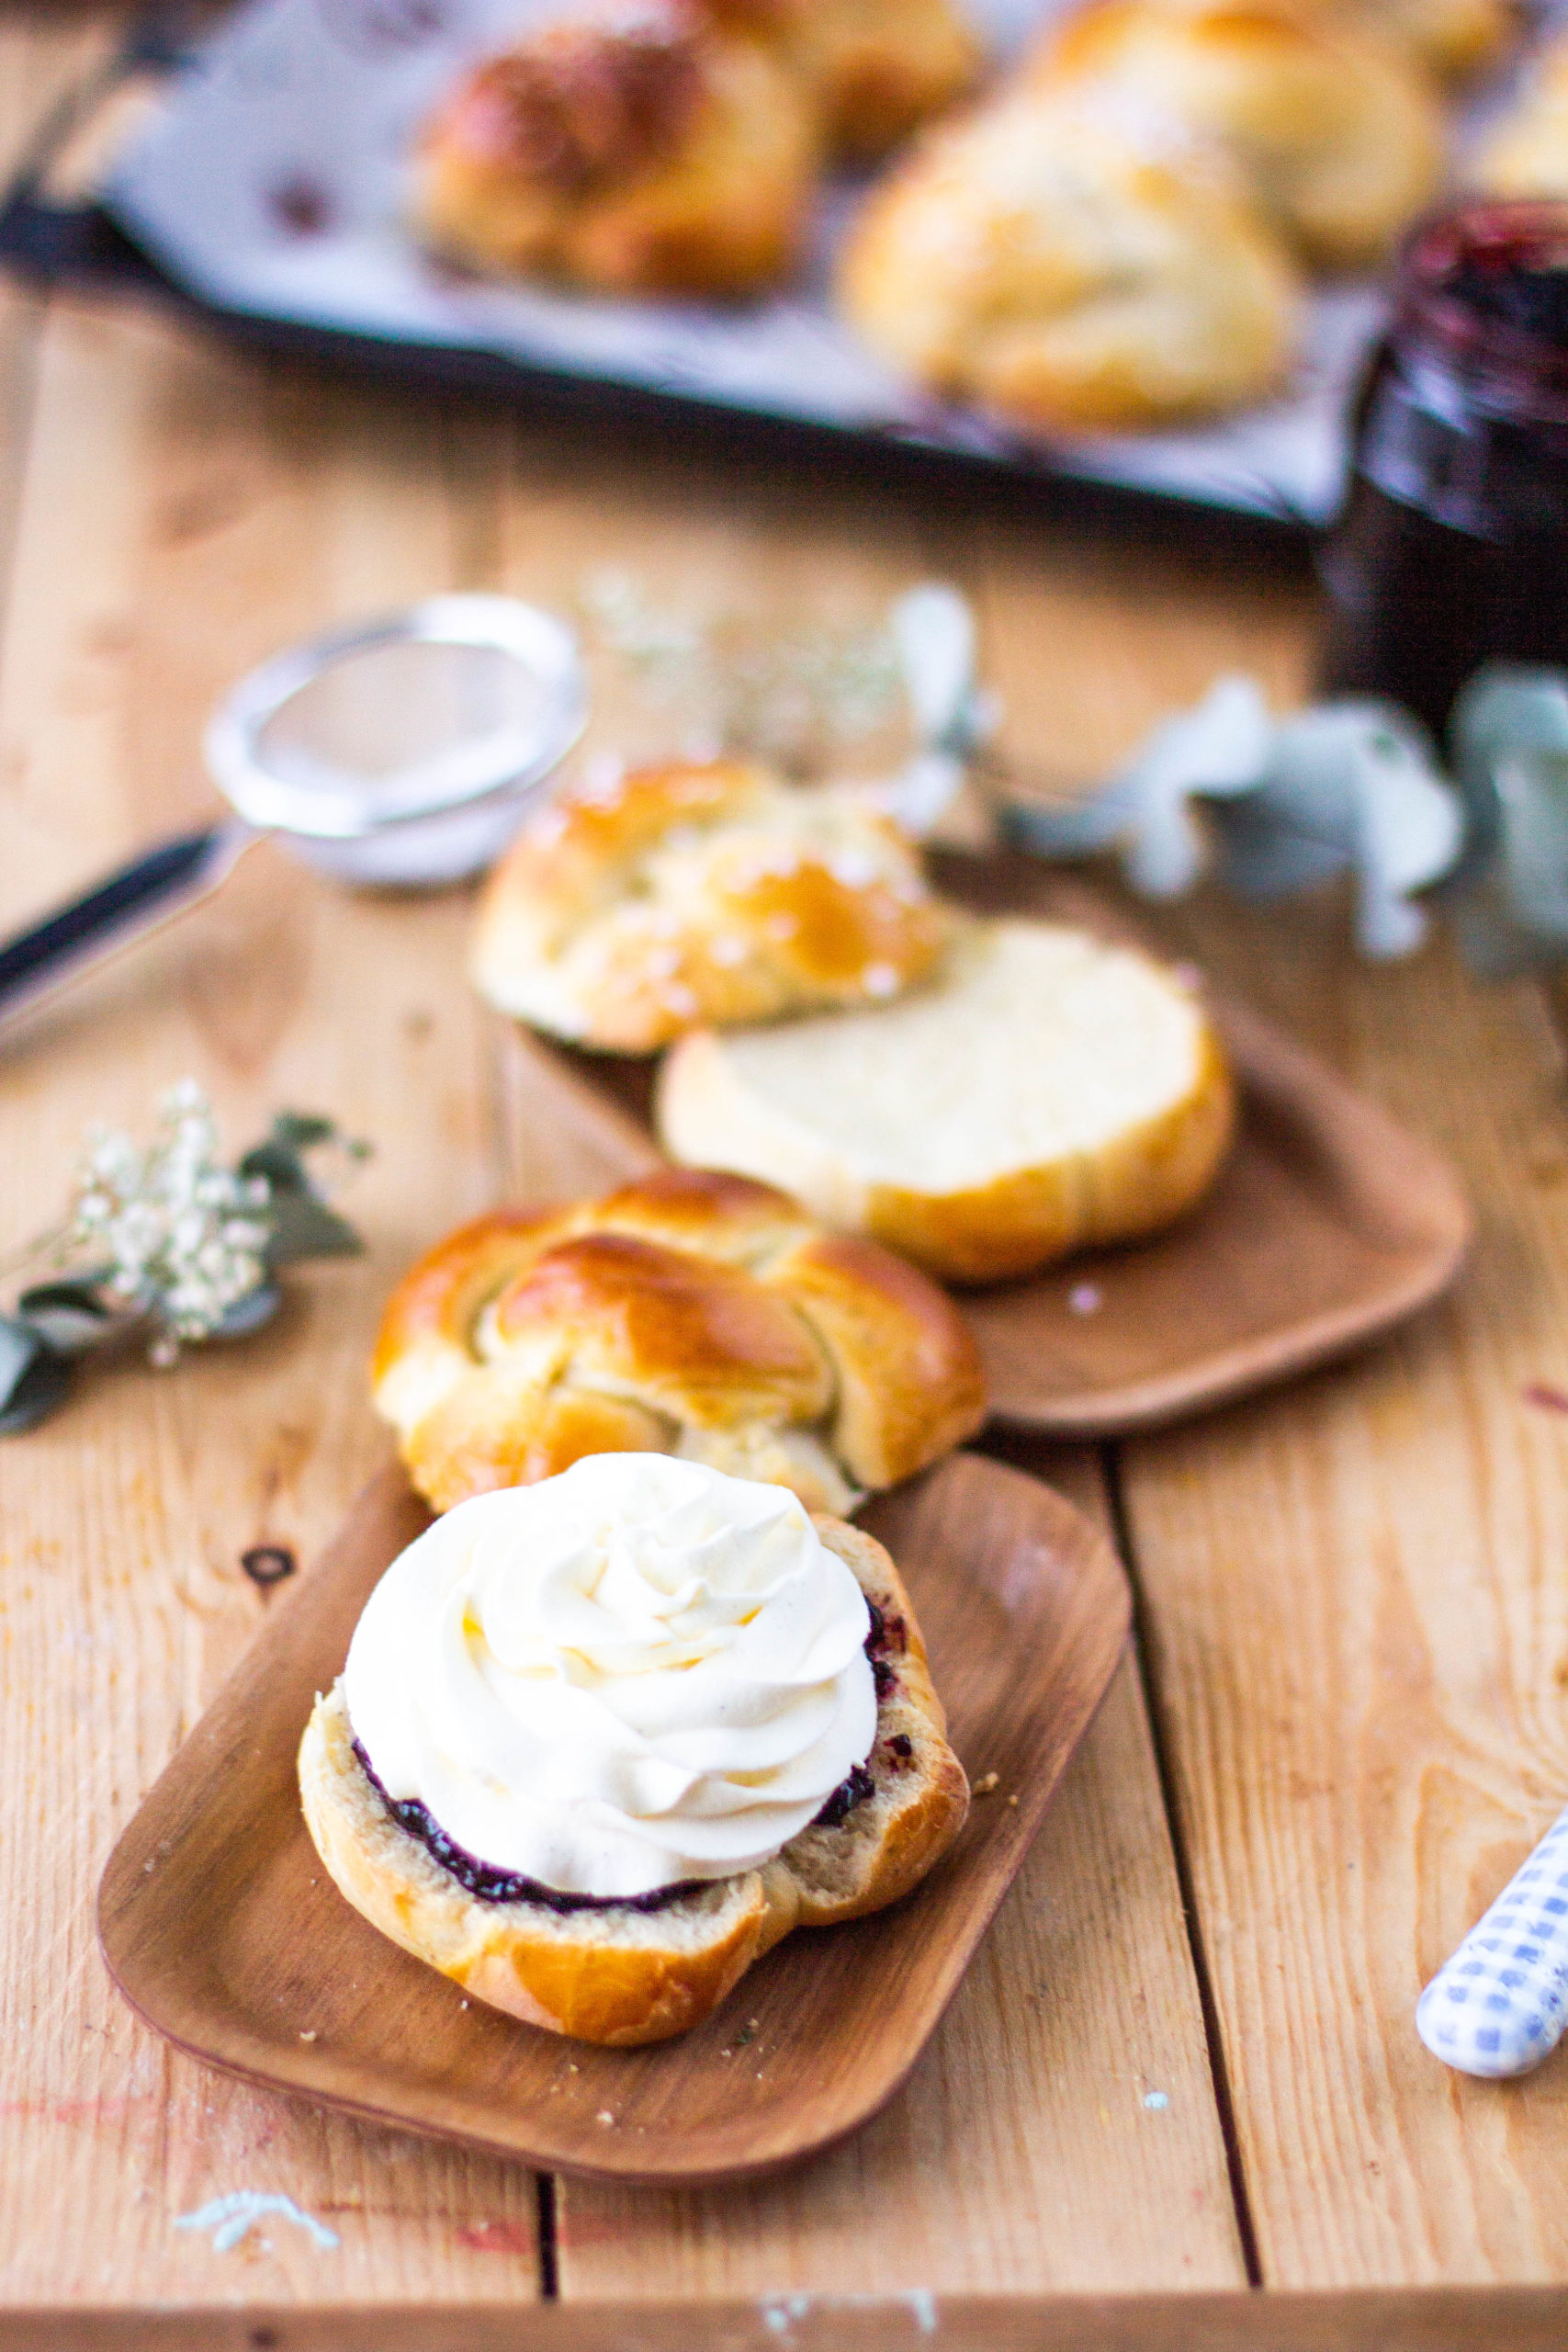 Delicious sweet roll with jam and whipped cream